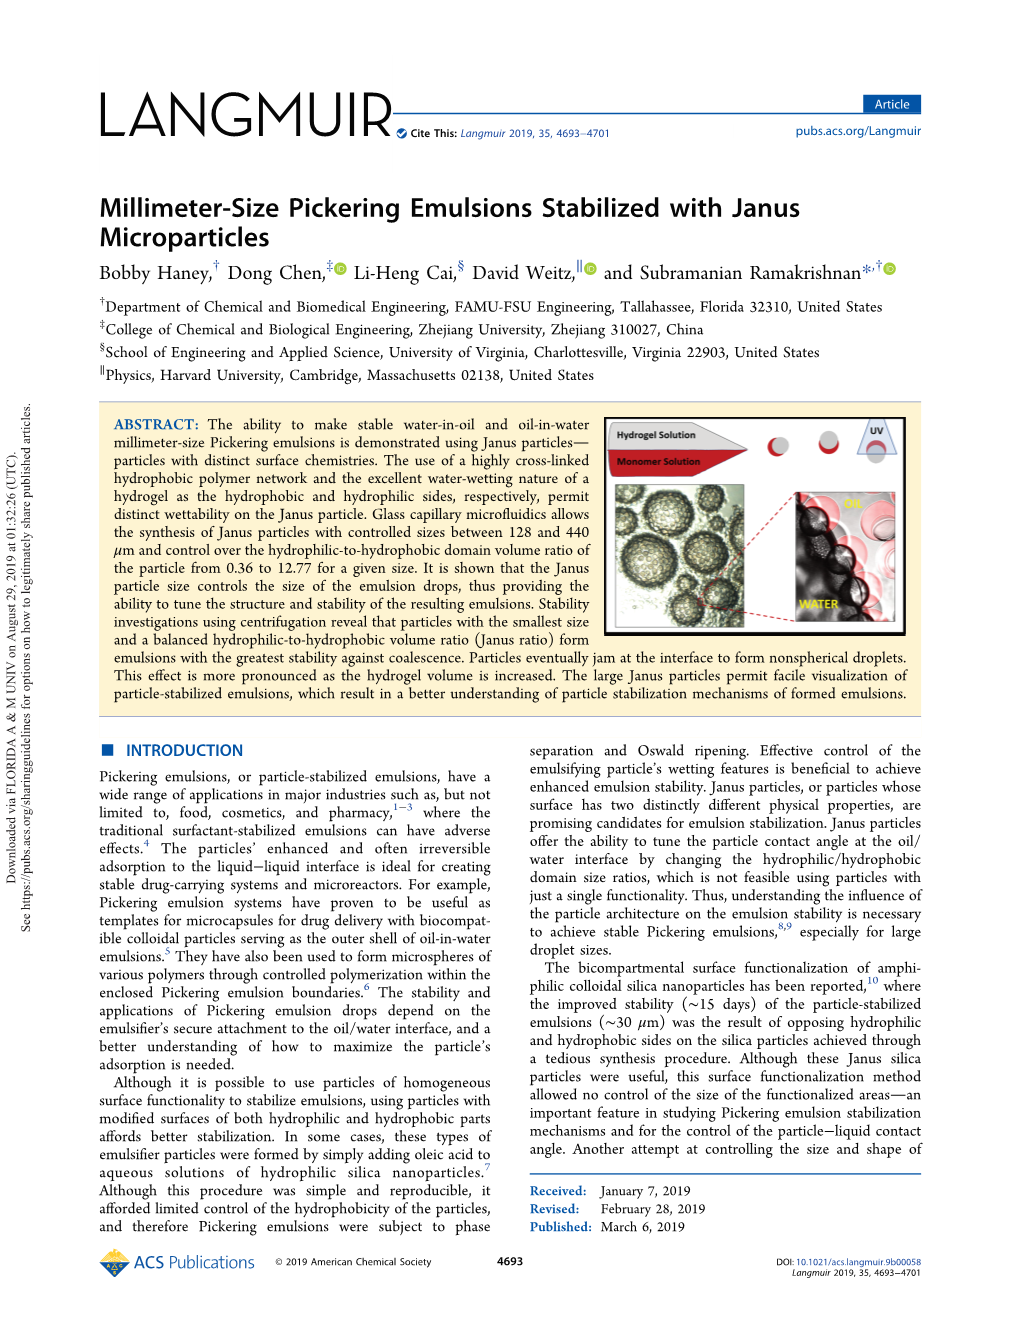 Millimeter-Size Pickering Emulsions Stabilized with Janus Microparticles